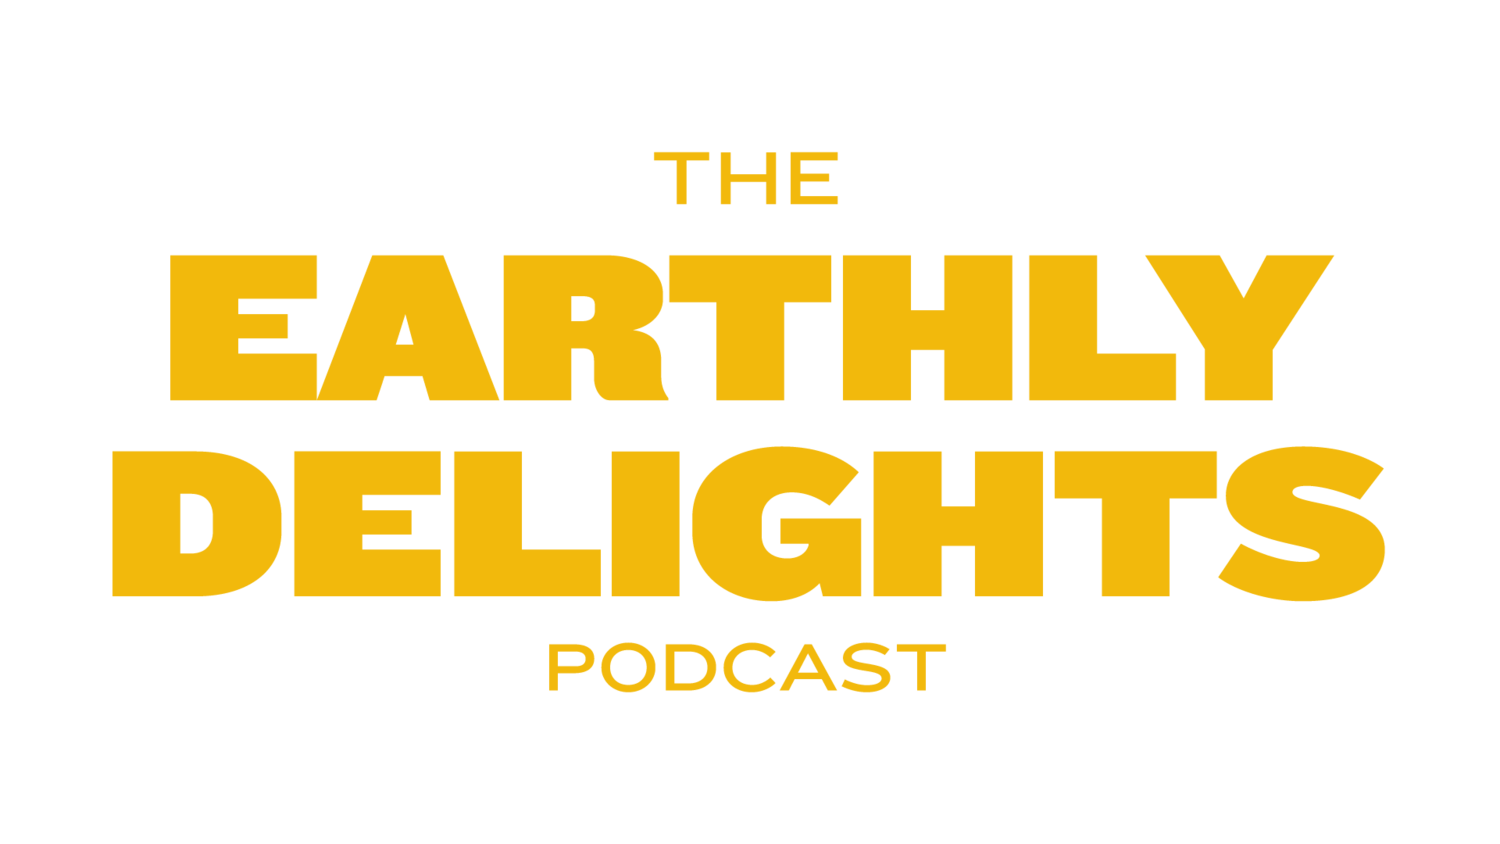 The Earthly Delights Podcast